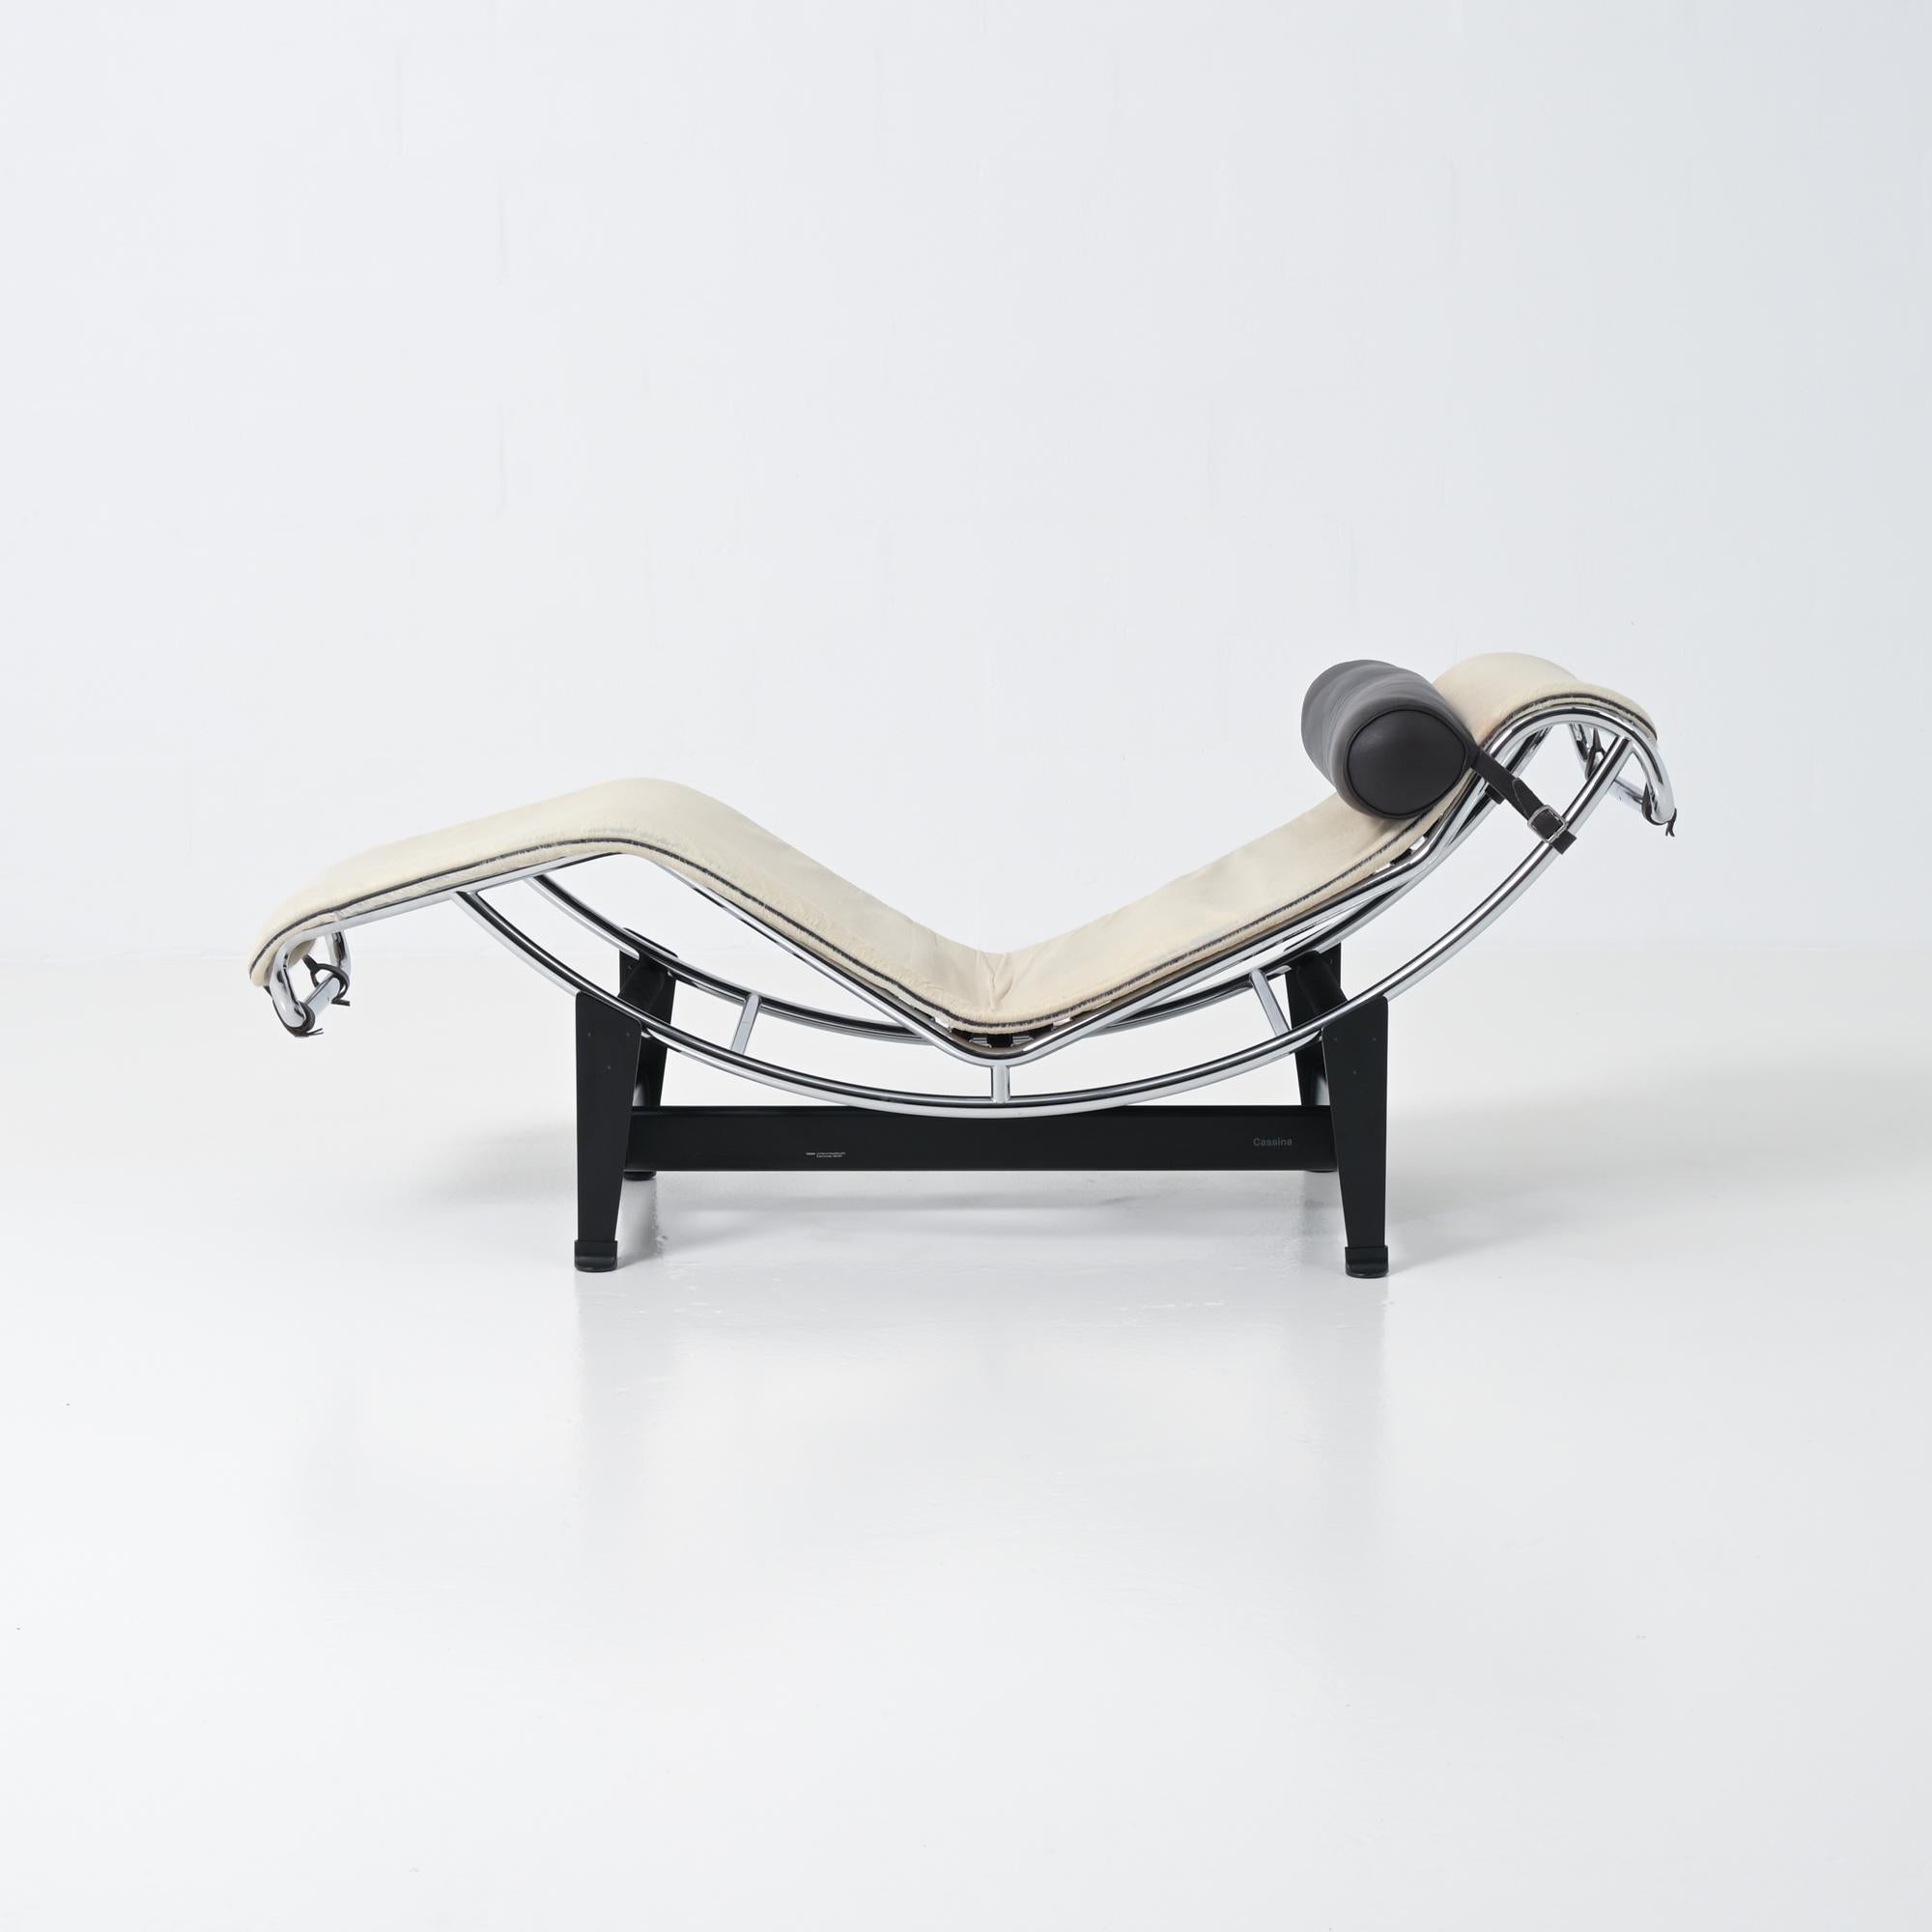 The lounge chair LC4 was designed by Le Corbusier, Pierre Jeanneret et Charlotte for the Salon d’Automne in Paris.
This lounge chair with a black steel base, an adjustable polished chrome plated metal tubular frame and a headrest in black leather is